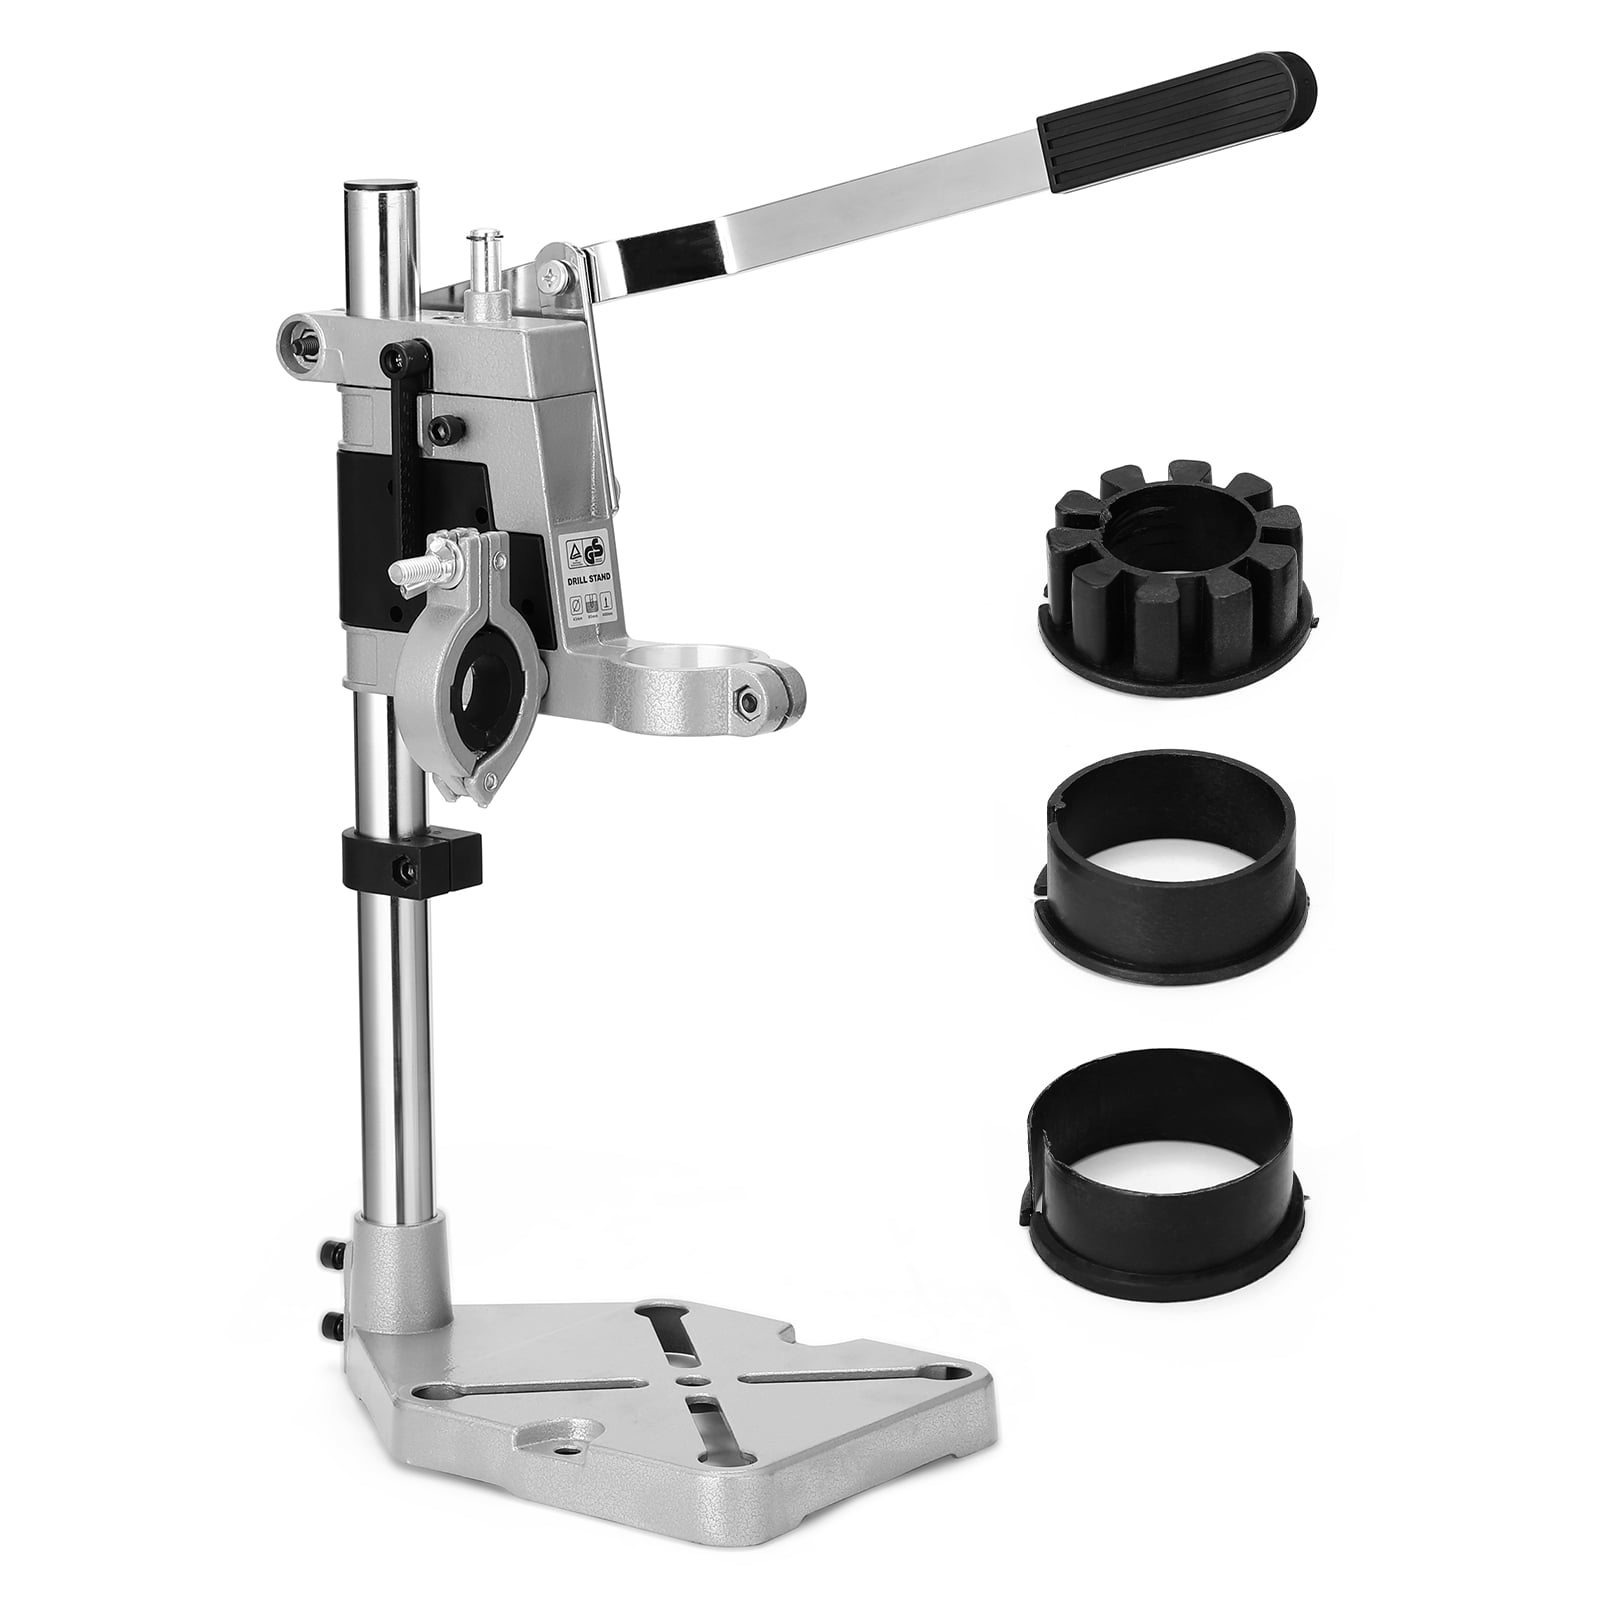 Bench Clamp Drill Press Stand Hand Drills Electric Drilling Pedestal Stand US 